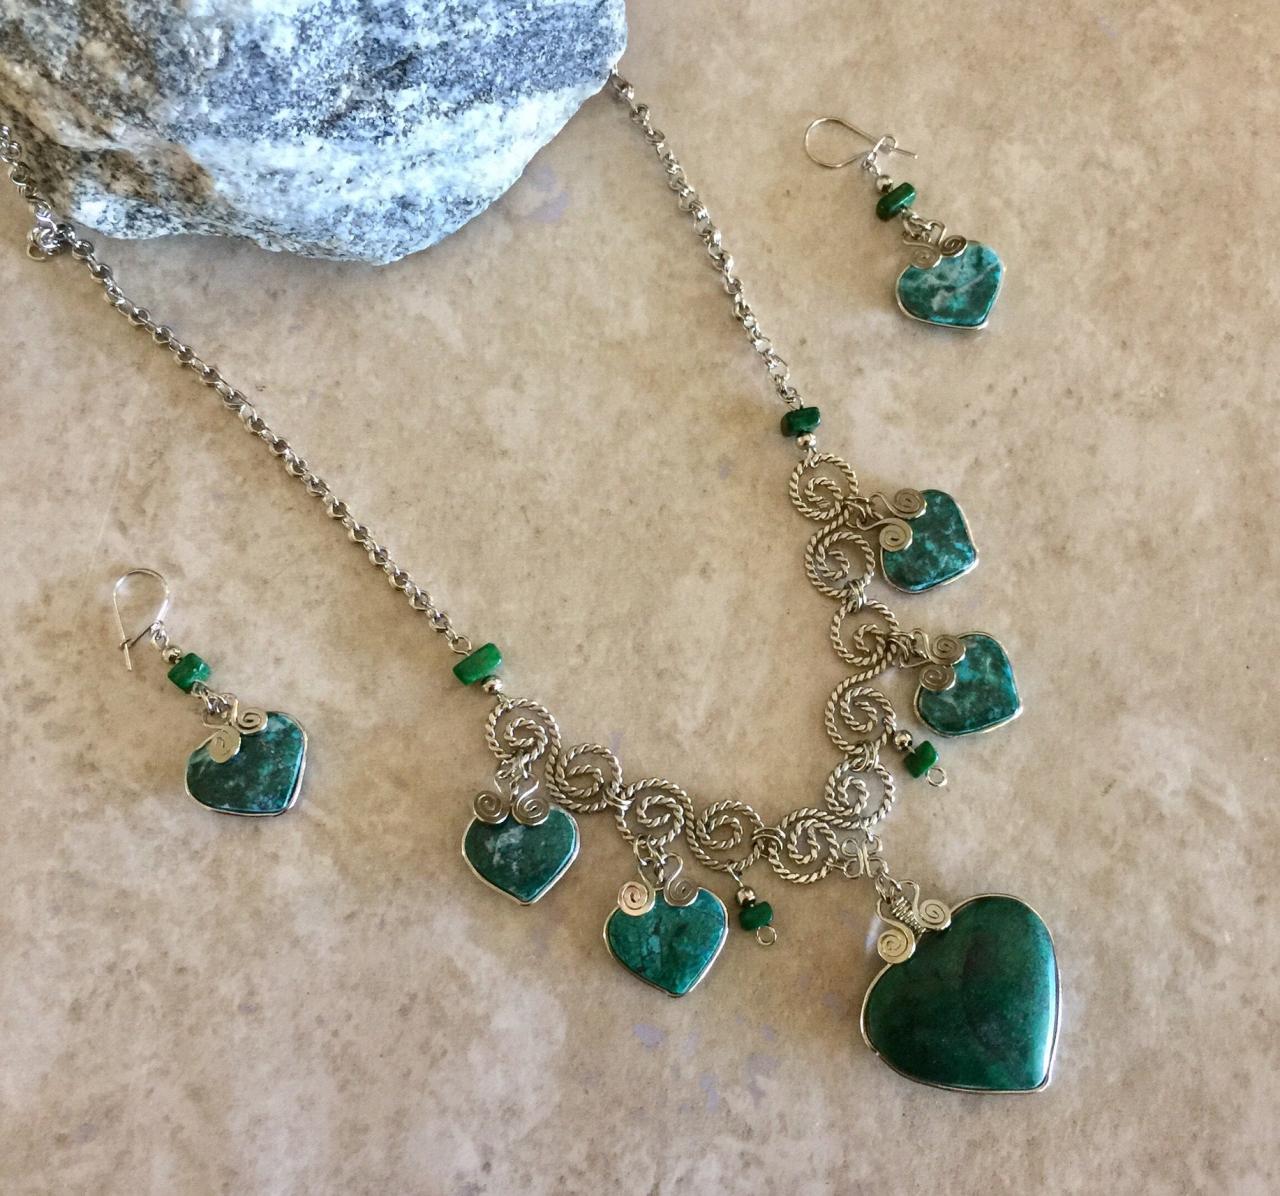 New! Chrysocolla Necklace and Earrings,Heart Shape Necklace, Handmade Necklace, Romantic Necklace, Eco Friendly Necklace, Filigree Necklace